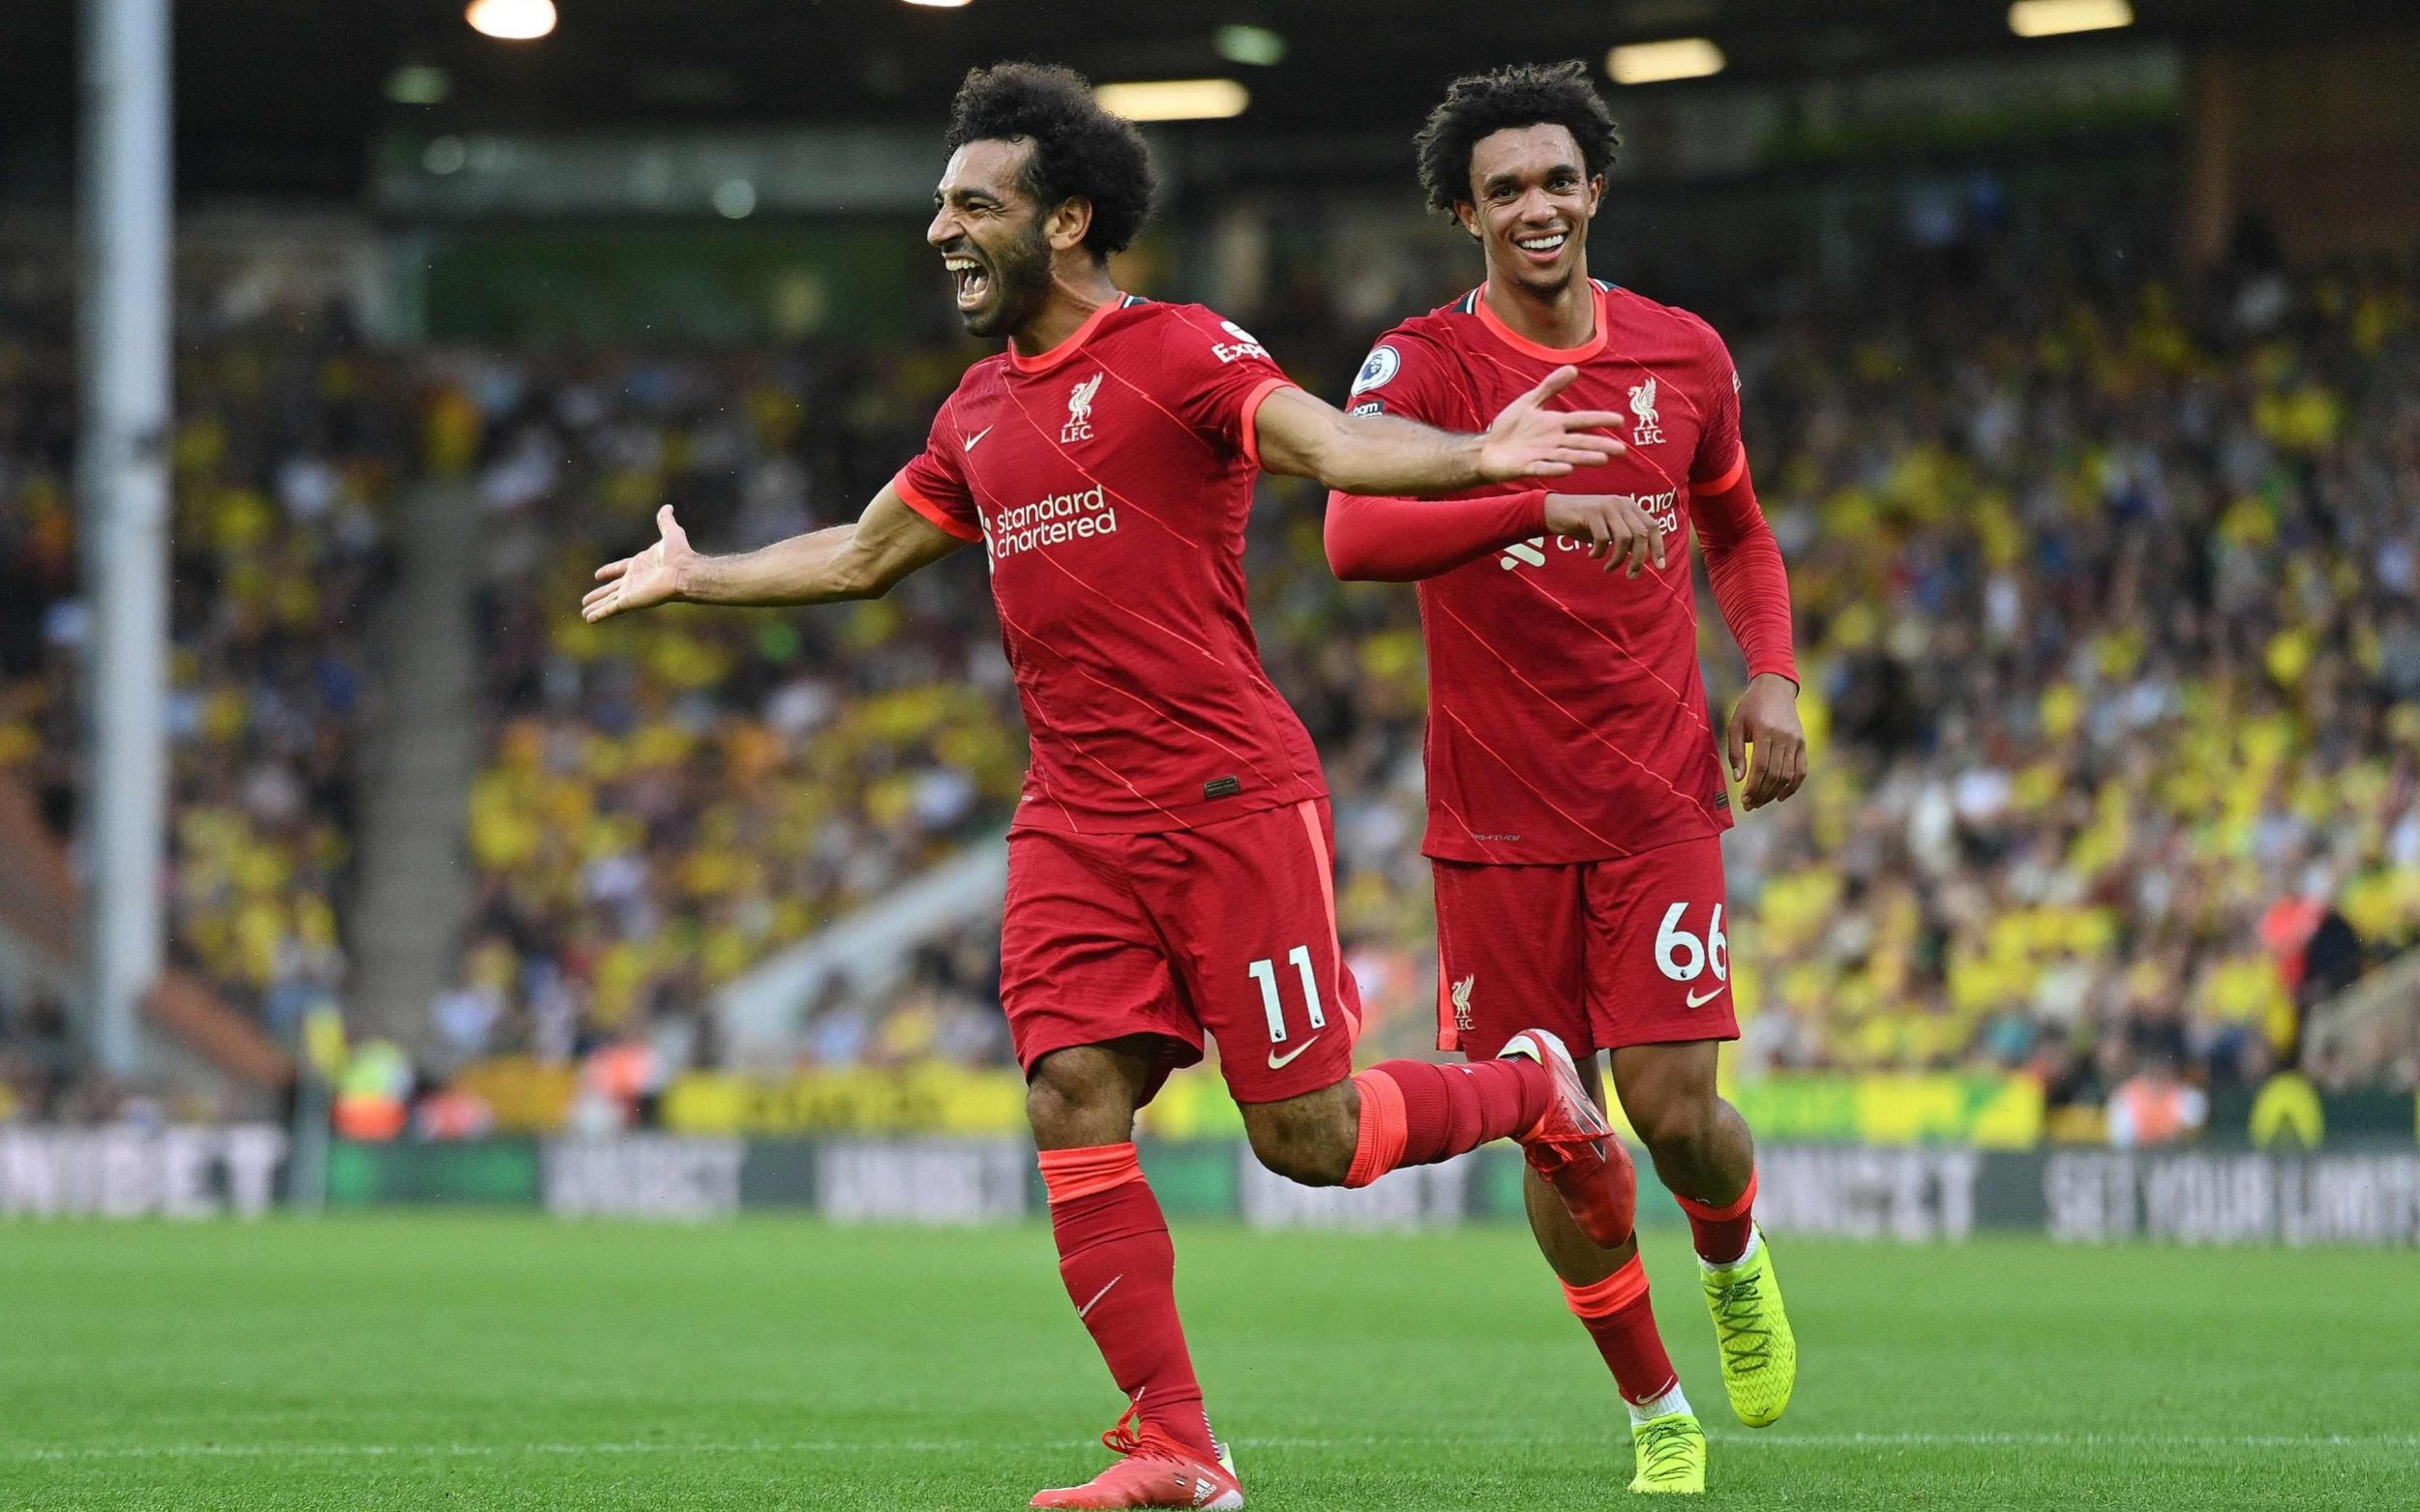 Liverpool cruise past Norwich in opener